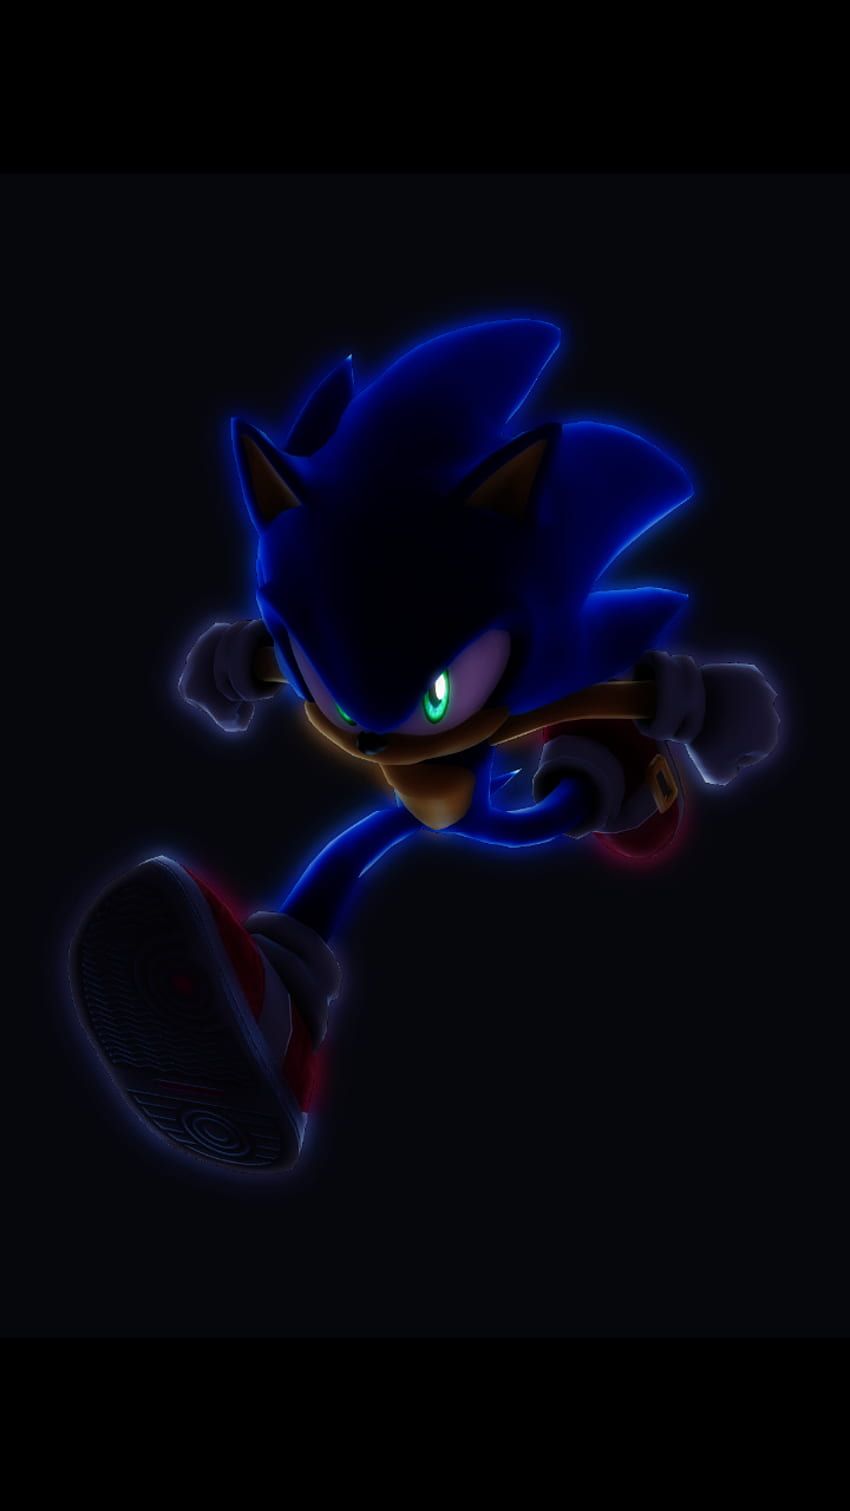 Sonic the Hedgehog wallpaper for mobiles and tablets - Sonic